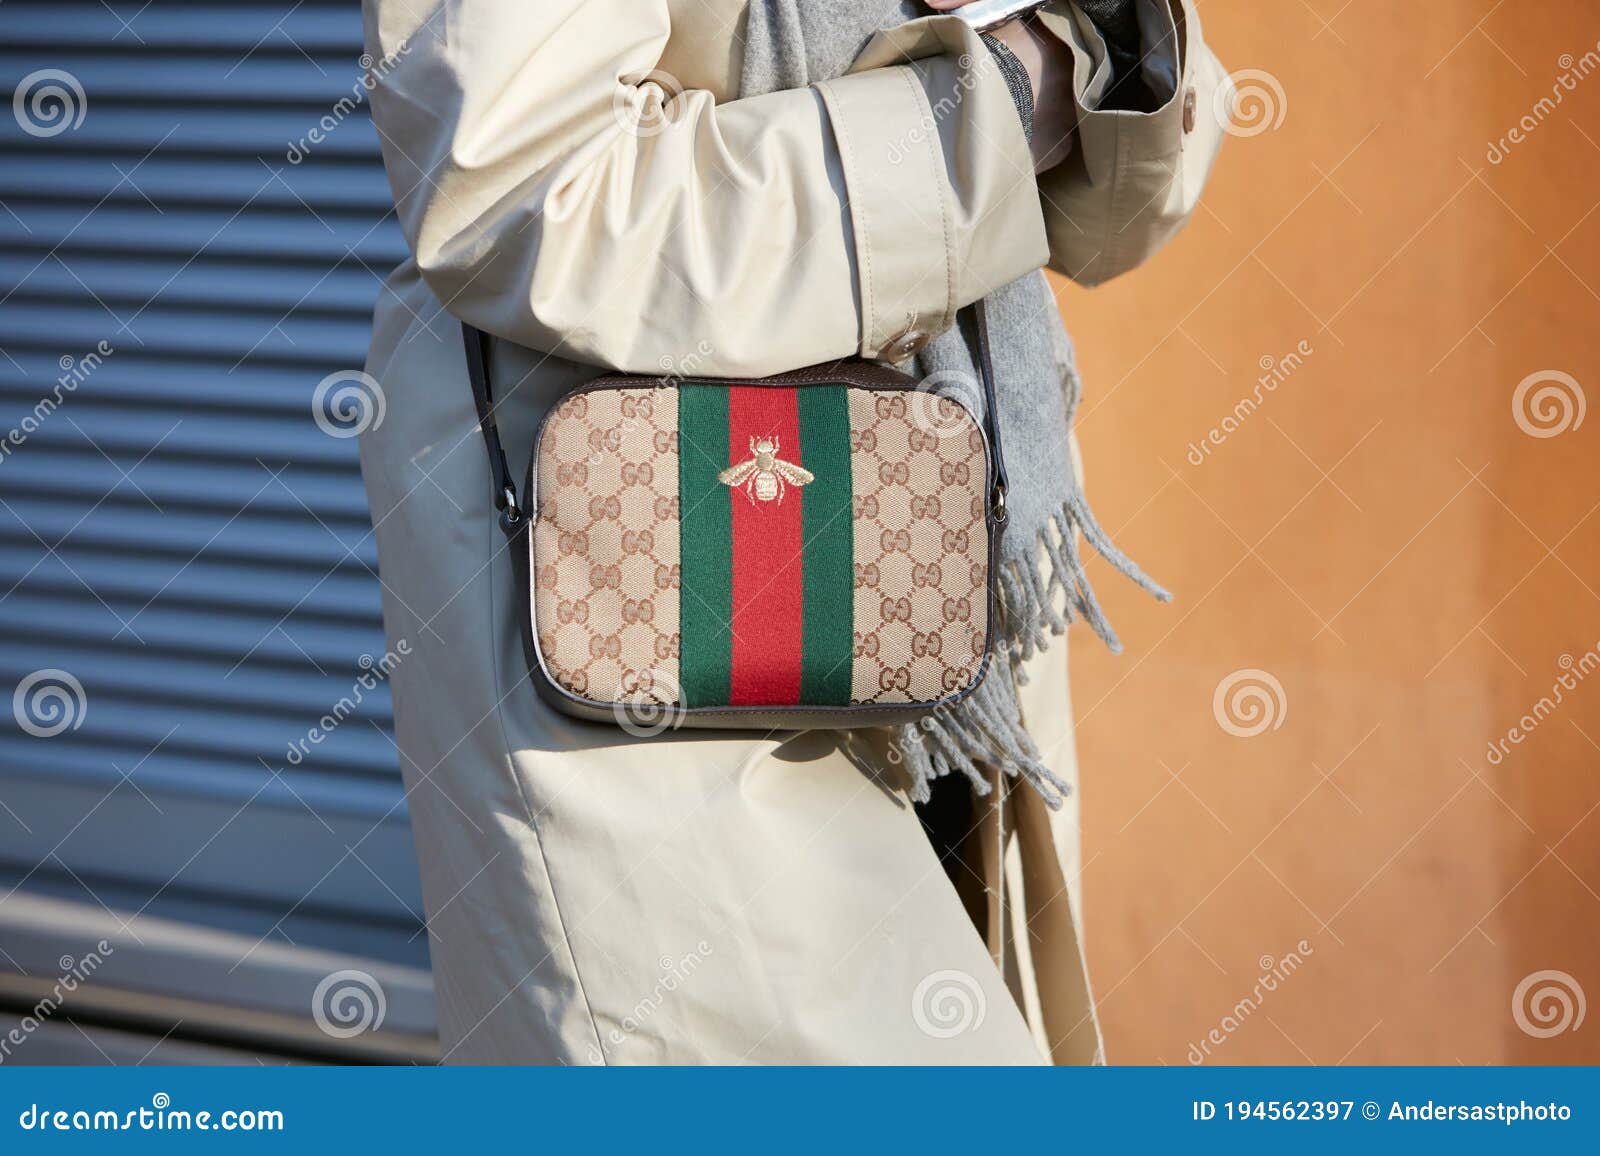 Woman with Gucci Bag with Bee and Green and Red Stripes before Emporio  Armani Fashion Show, Milan Fashion Week Editorial Image - Image of people,  week: 194562400